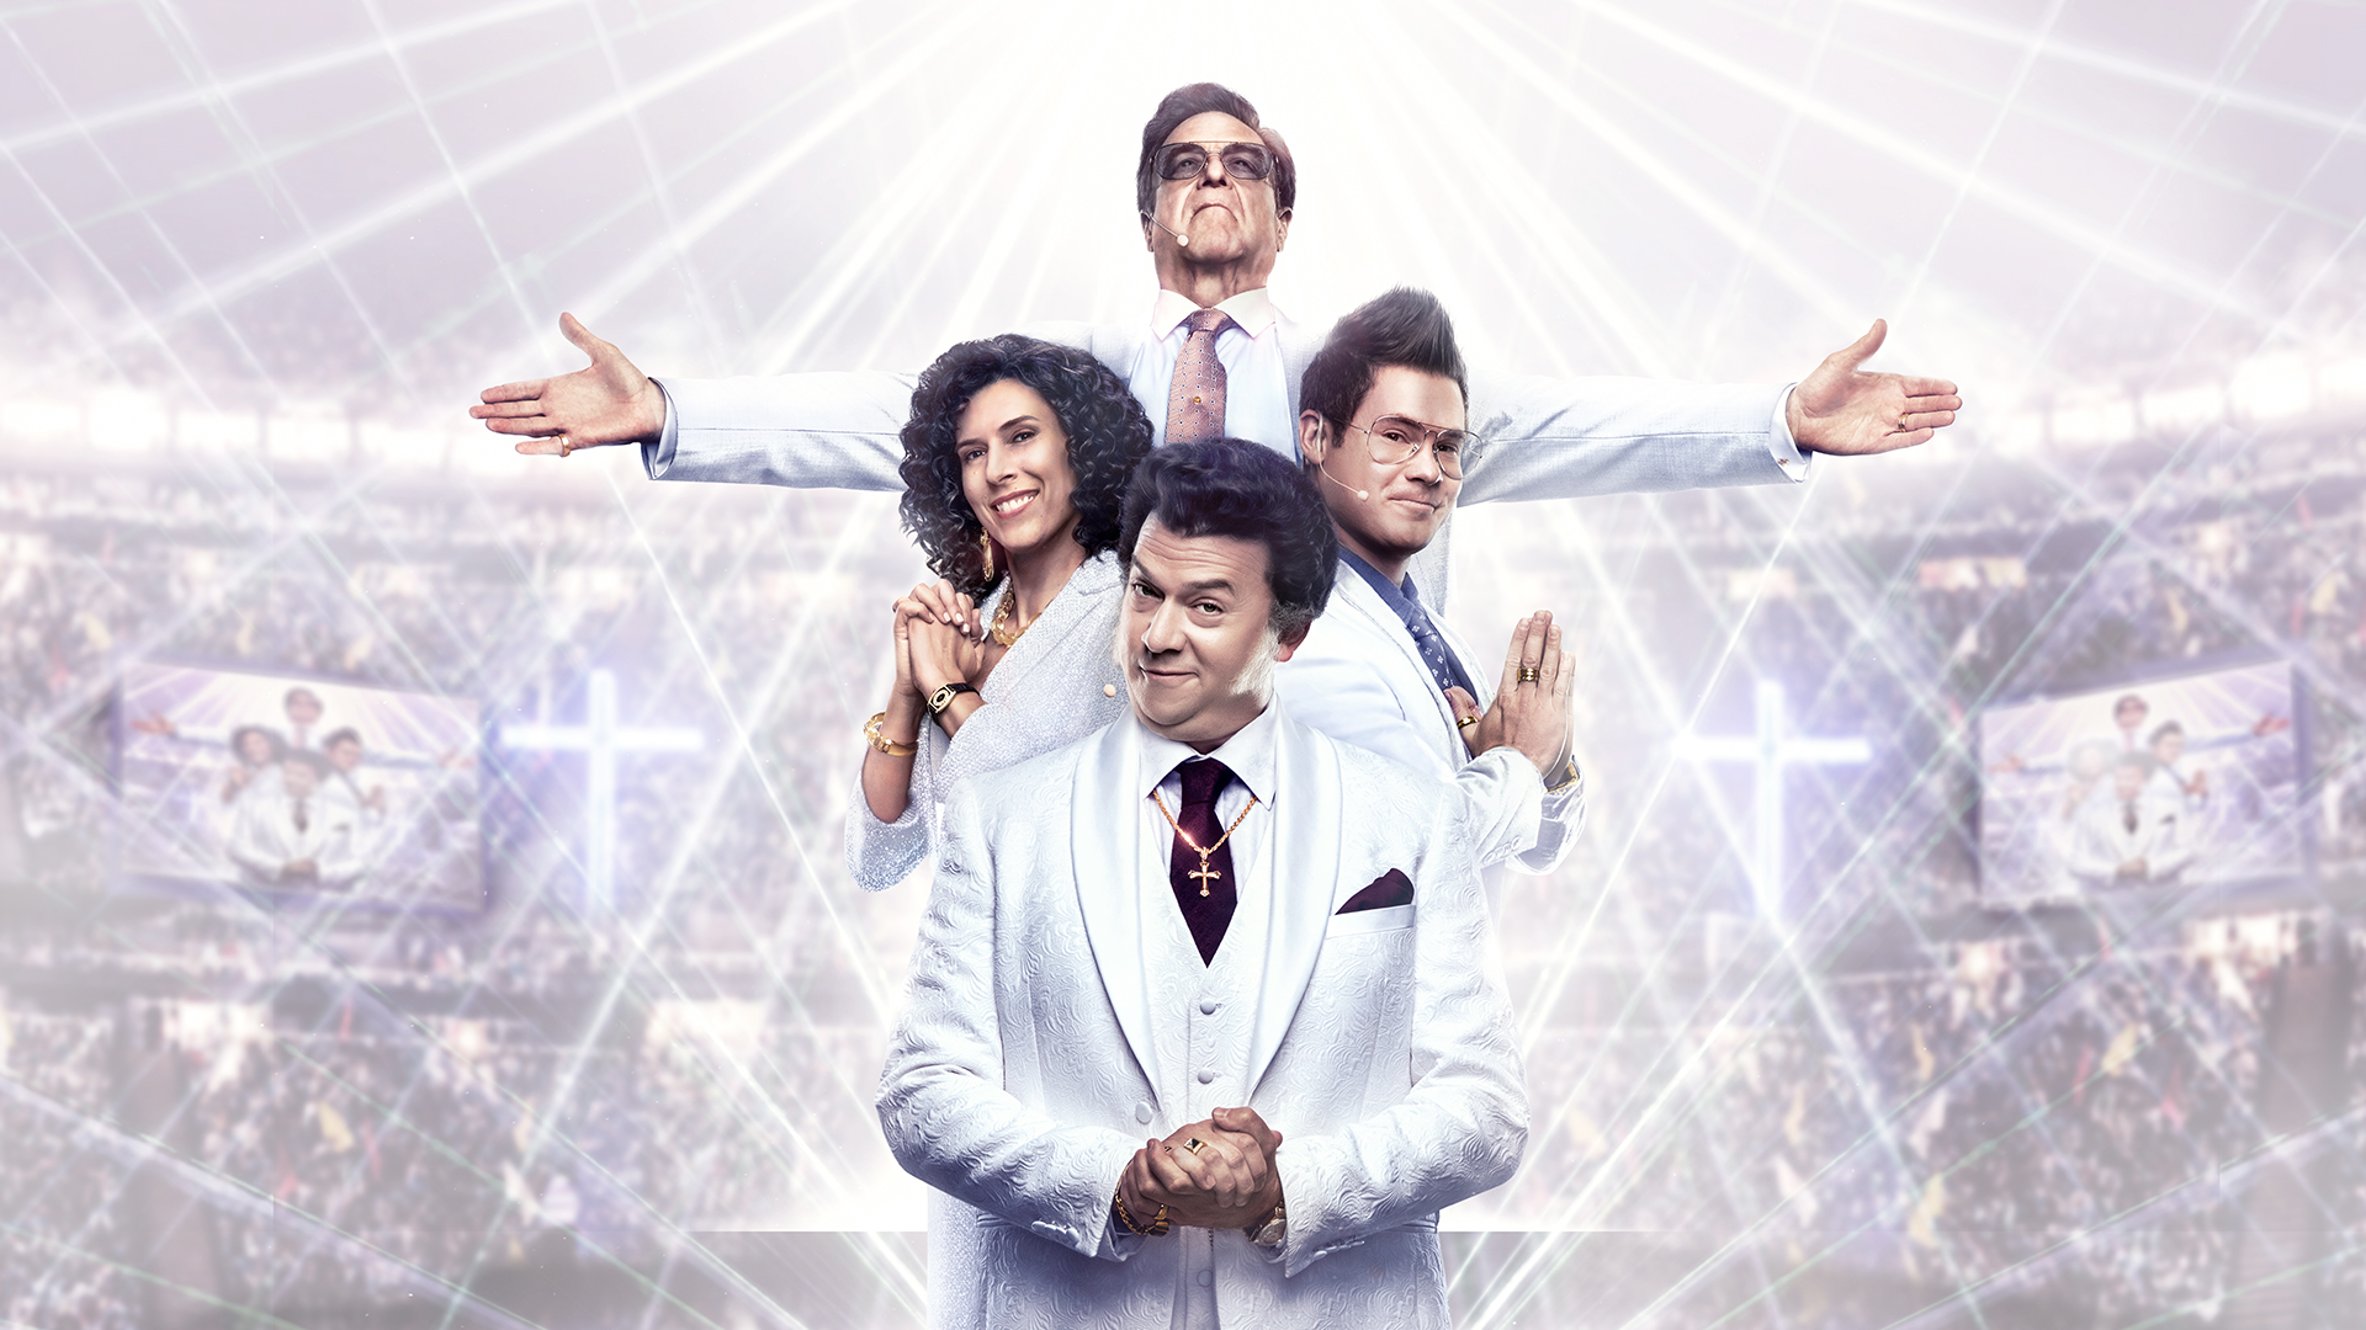 HBO’s “The Righteous Gemstones"